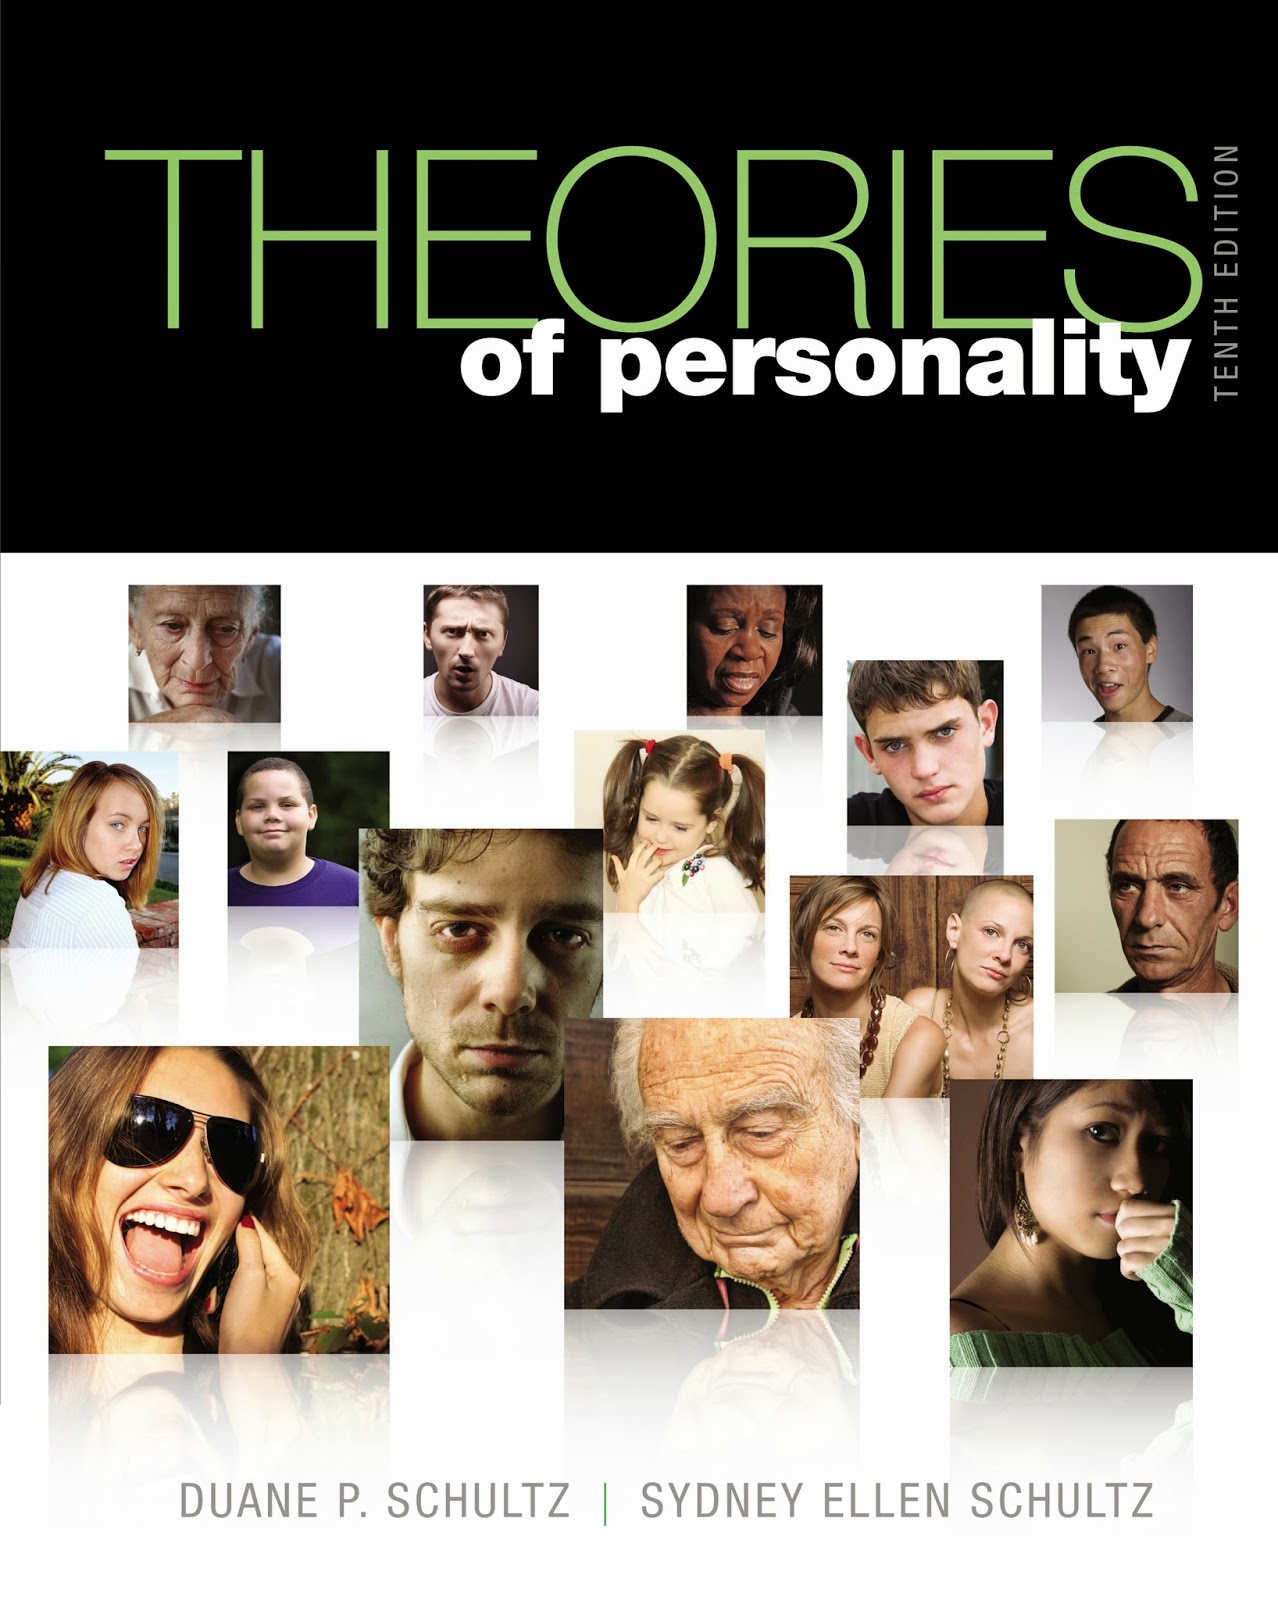 http://kingcheapebook.blogspot.com/2014/07/theories-of-personality.html